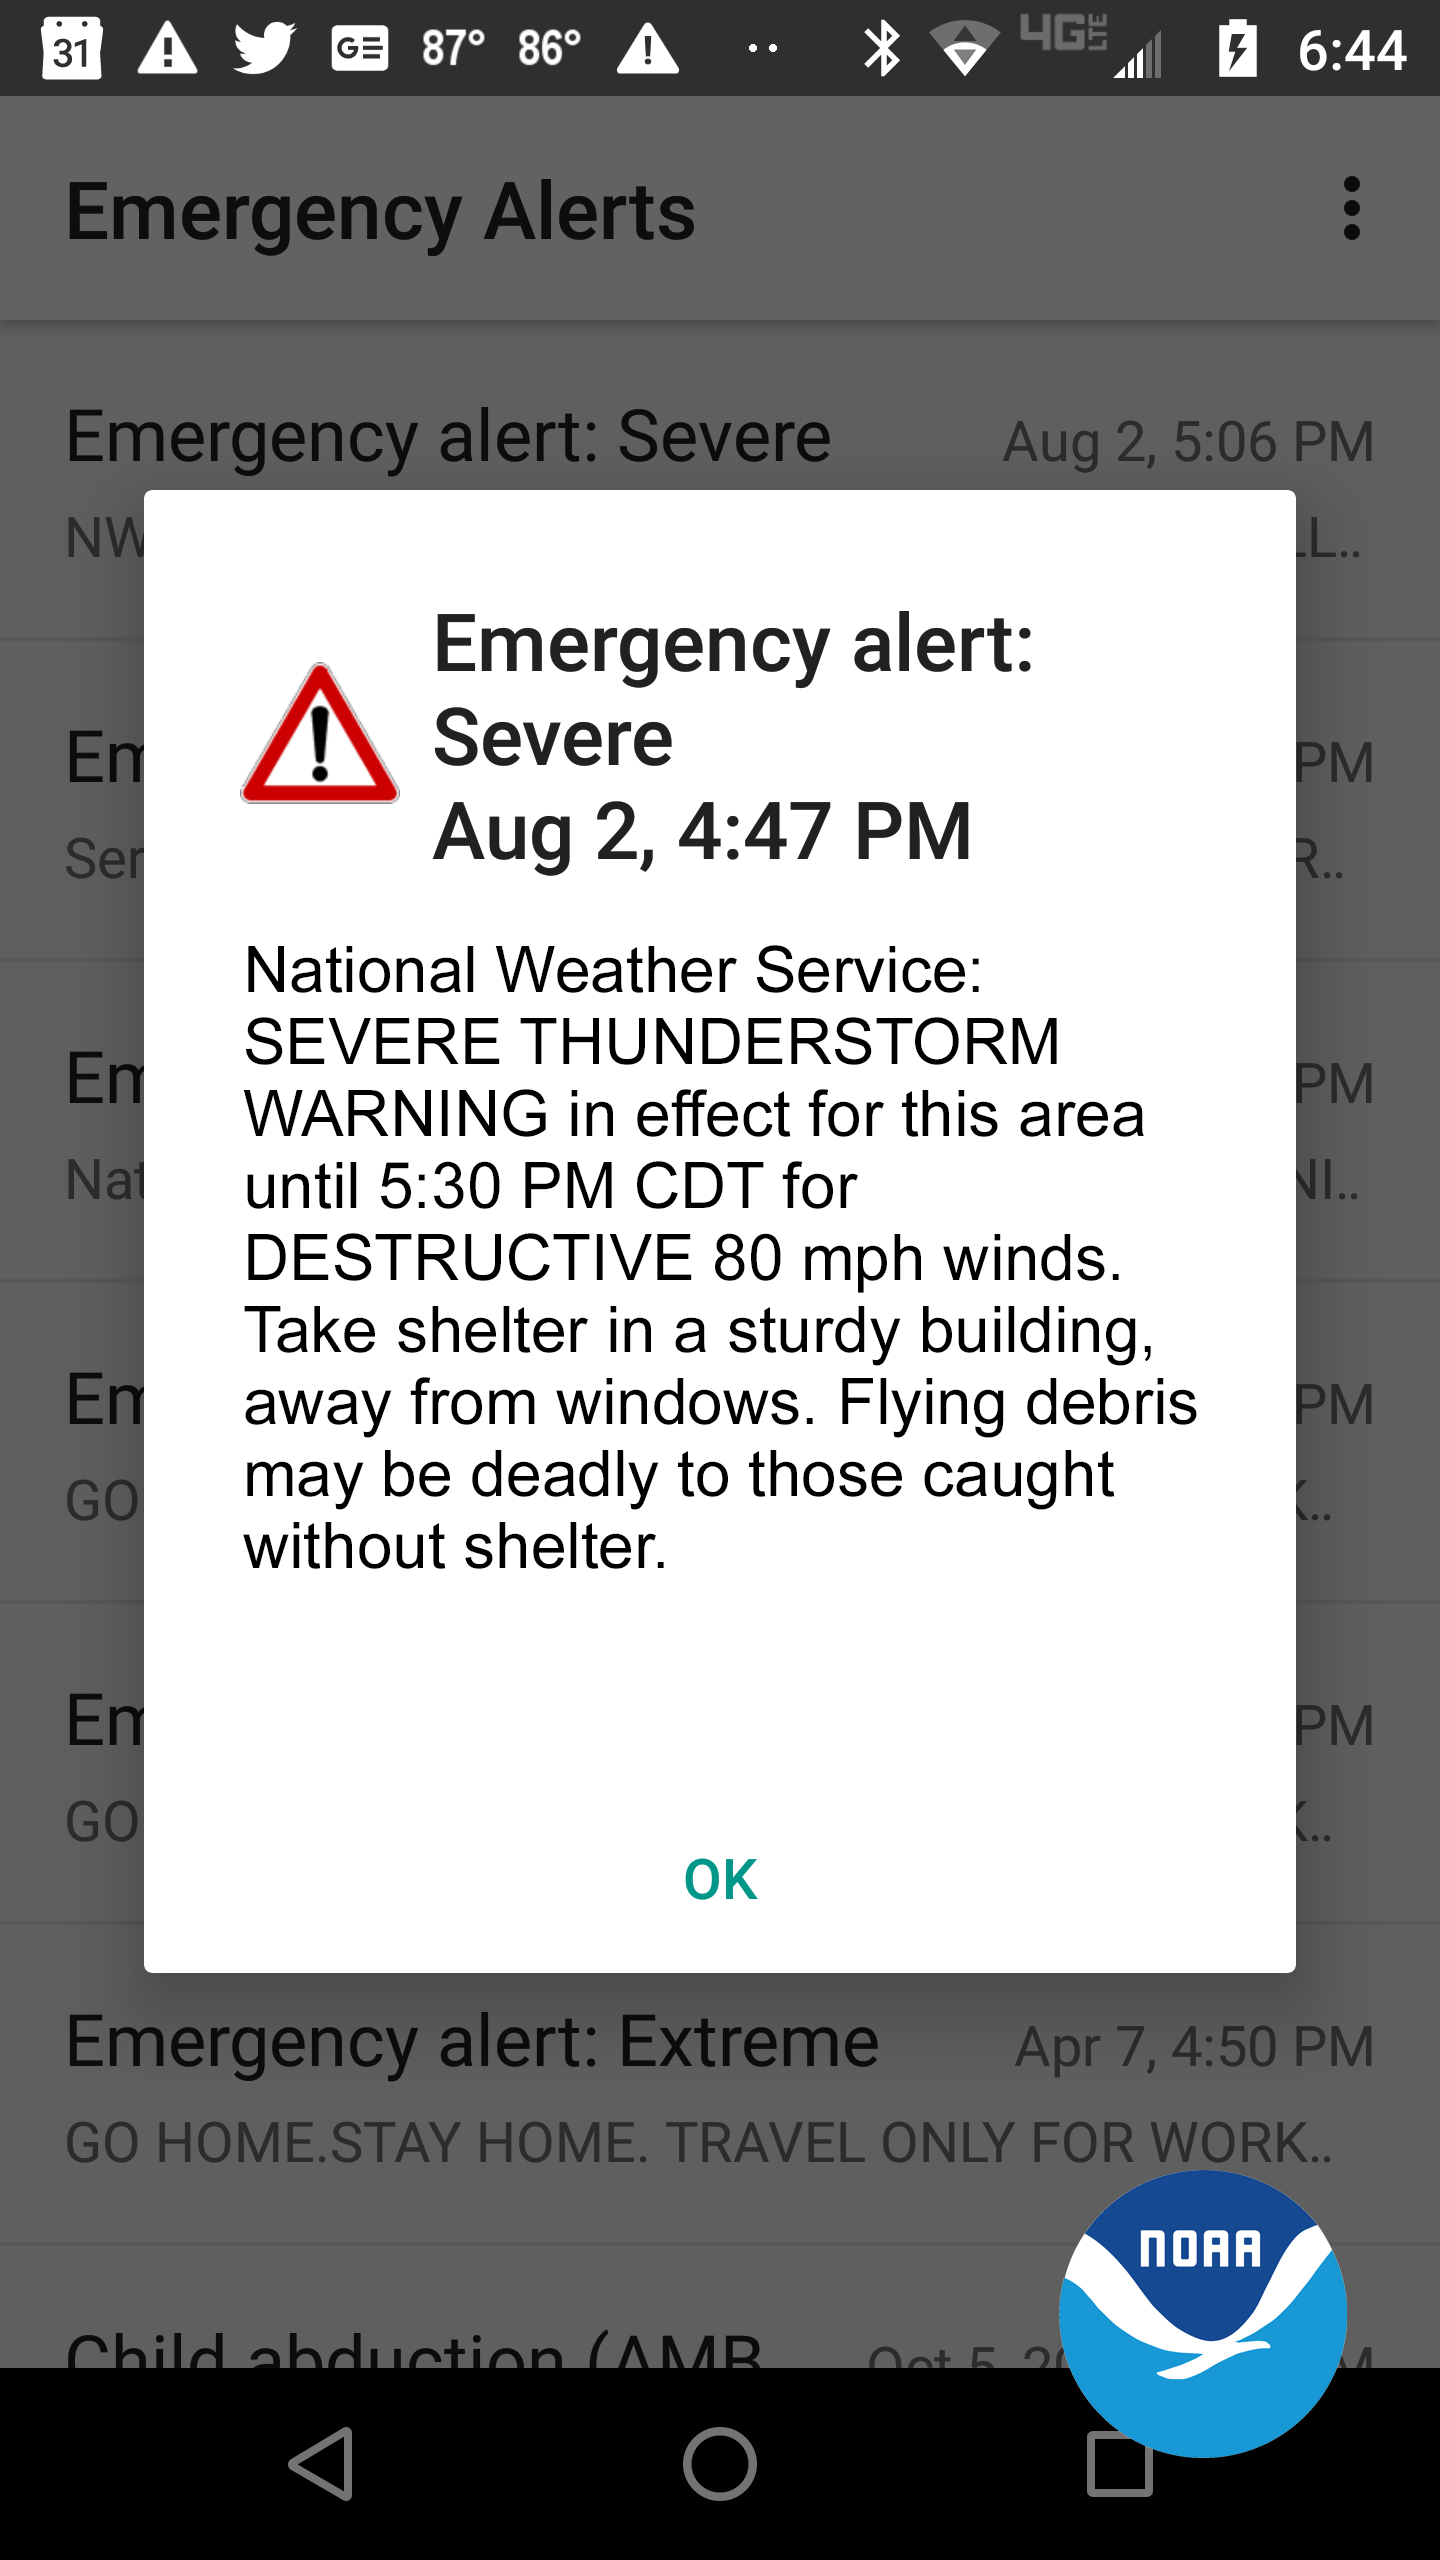 A Wireless Emergency Alert for a Severe Thunderstorm Warning